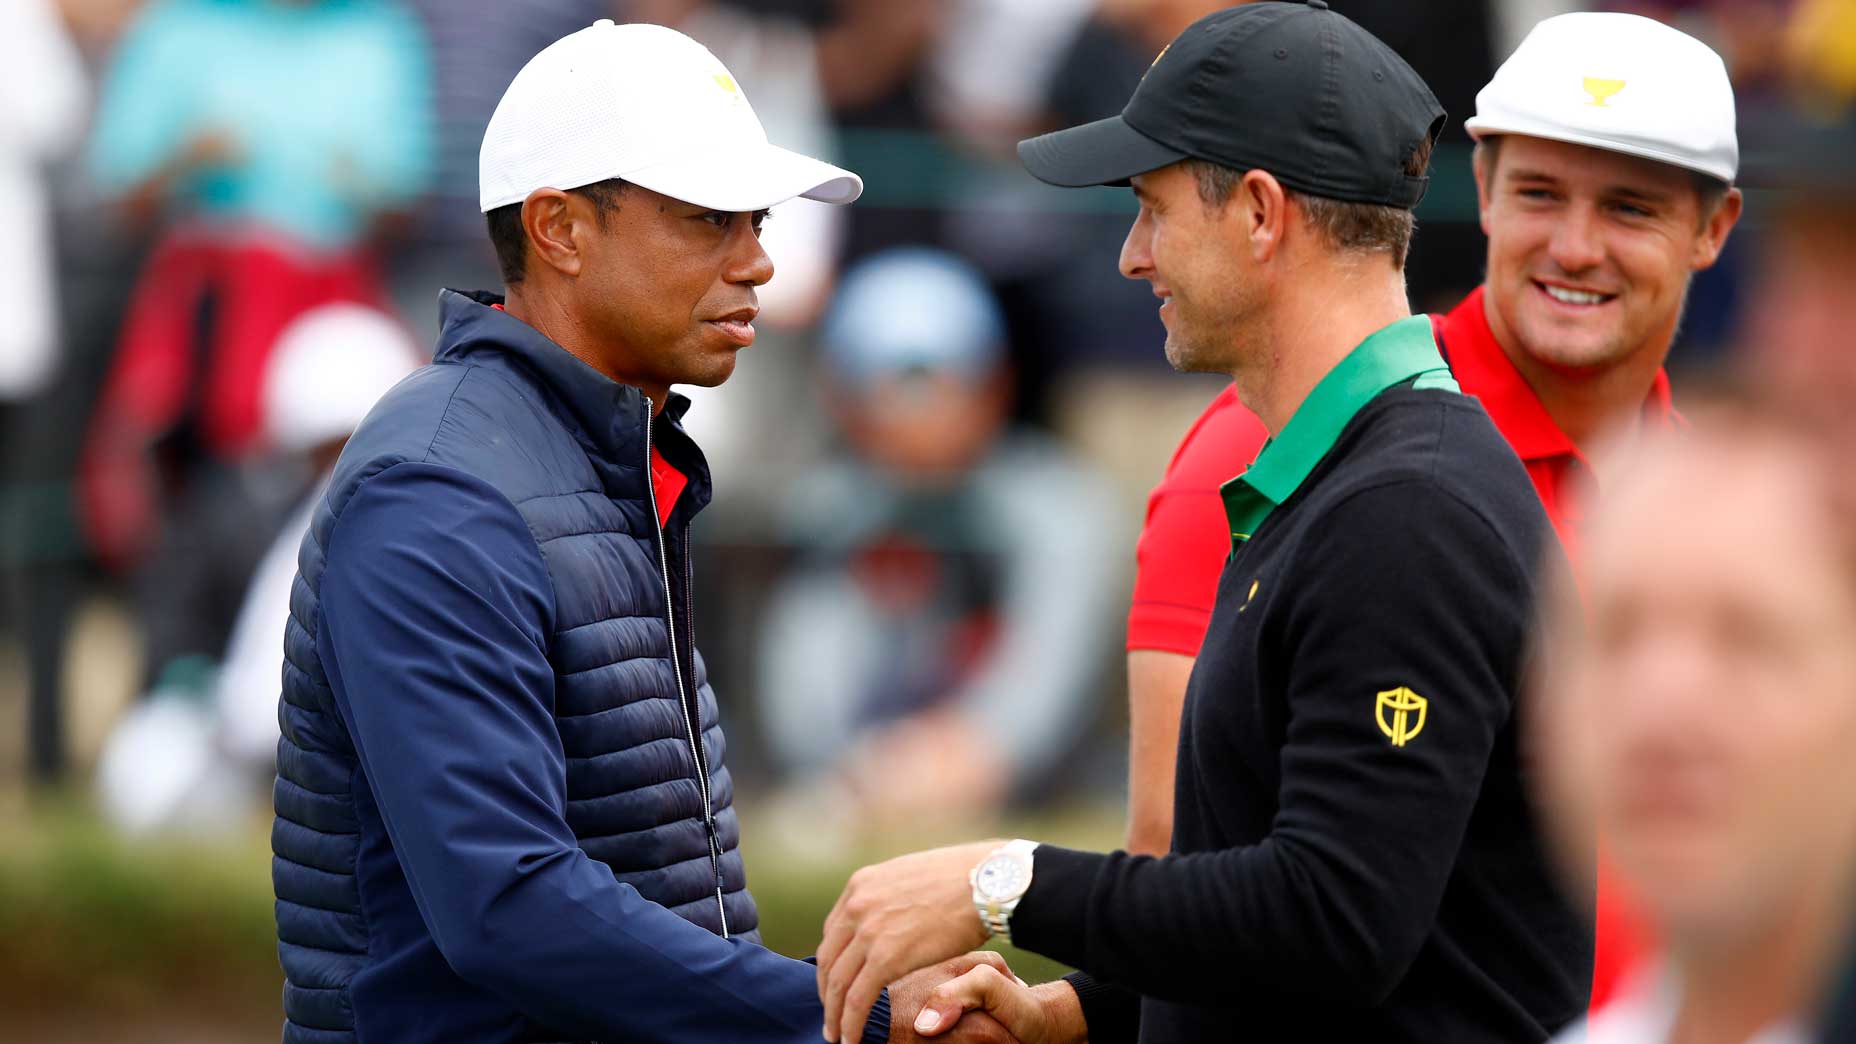 Adam Scott of Australia and the International team shakes hands with Playing Captain Tiger Woods and the United States team after the United States team defeated them 16-14 on day four of the 2019 Presidents Cup at Royal Melbourne Golf Course on December 15, 2019 in Melbourne, Australia.